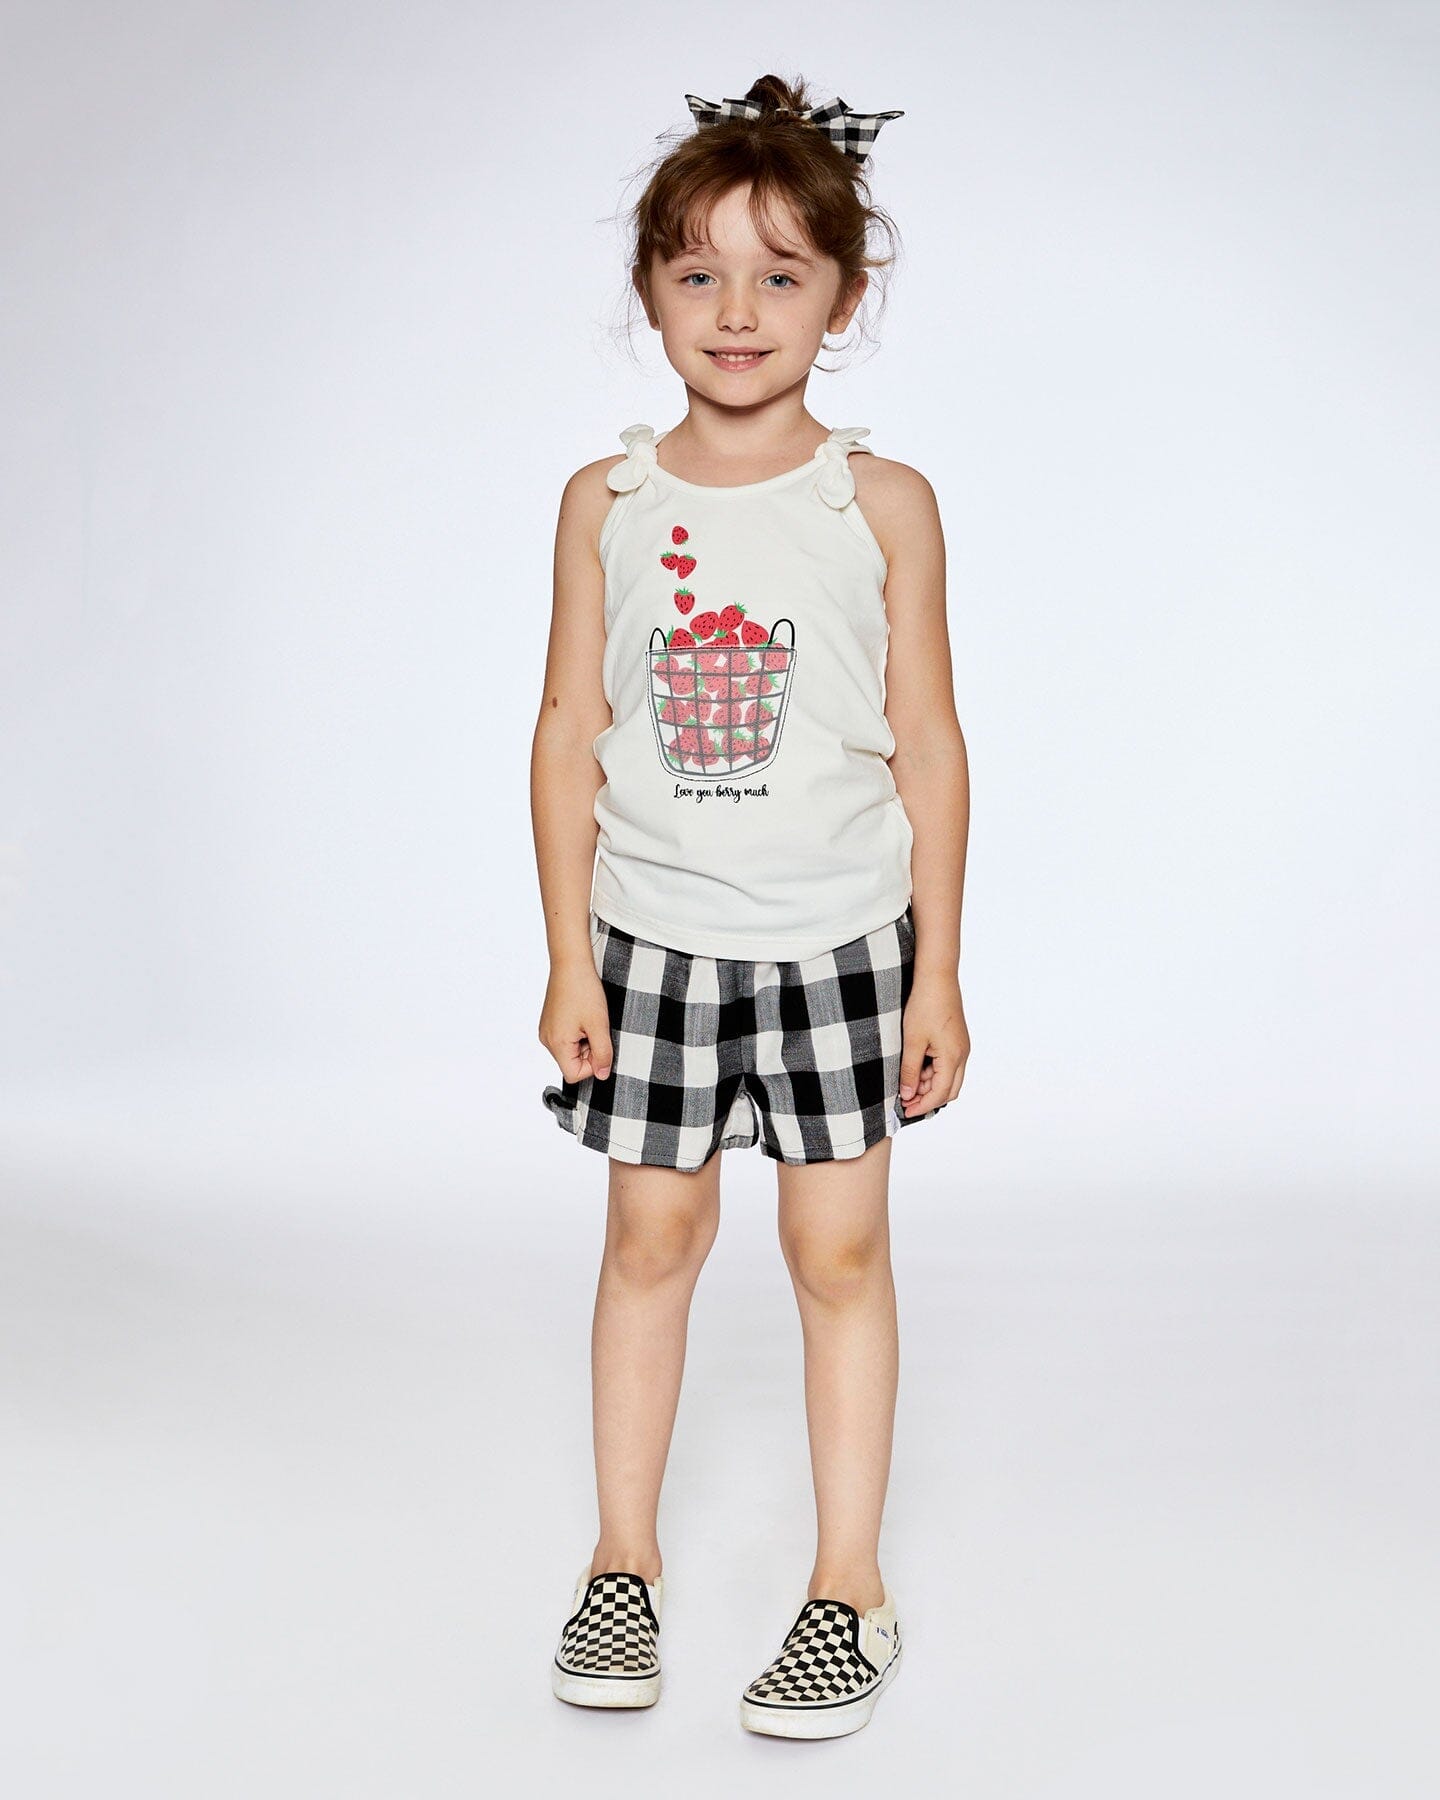 Organic Cotton Tank Top With Knot Off White - F30K72_101